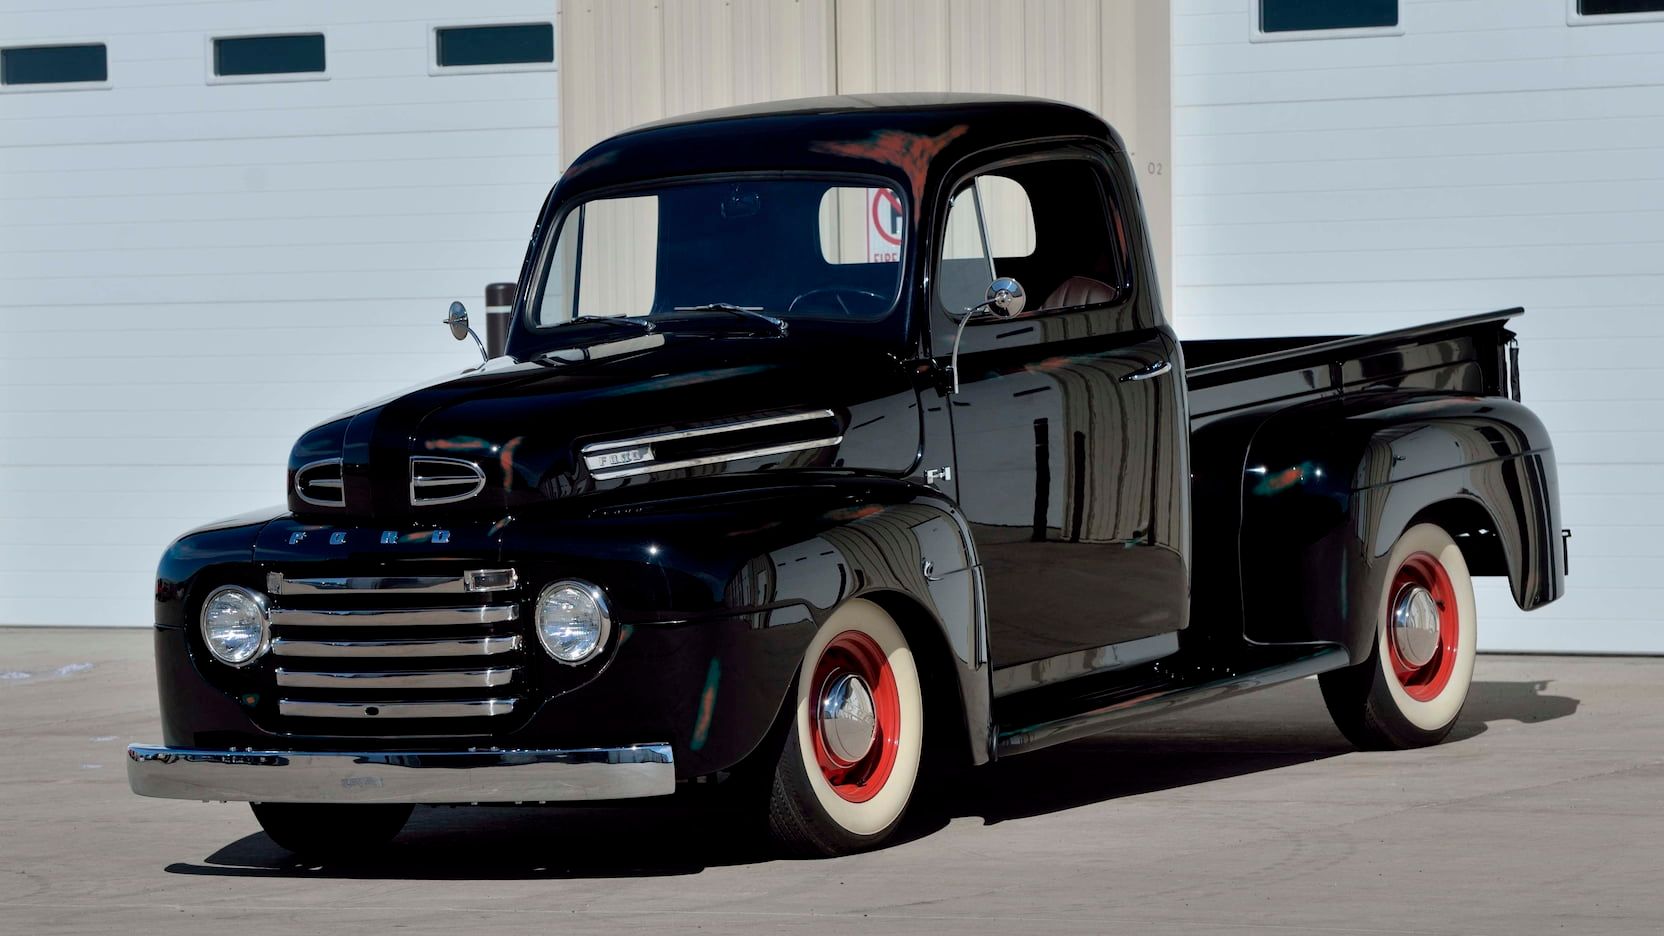 A parked black 1948 Ford f1